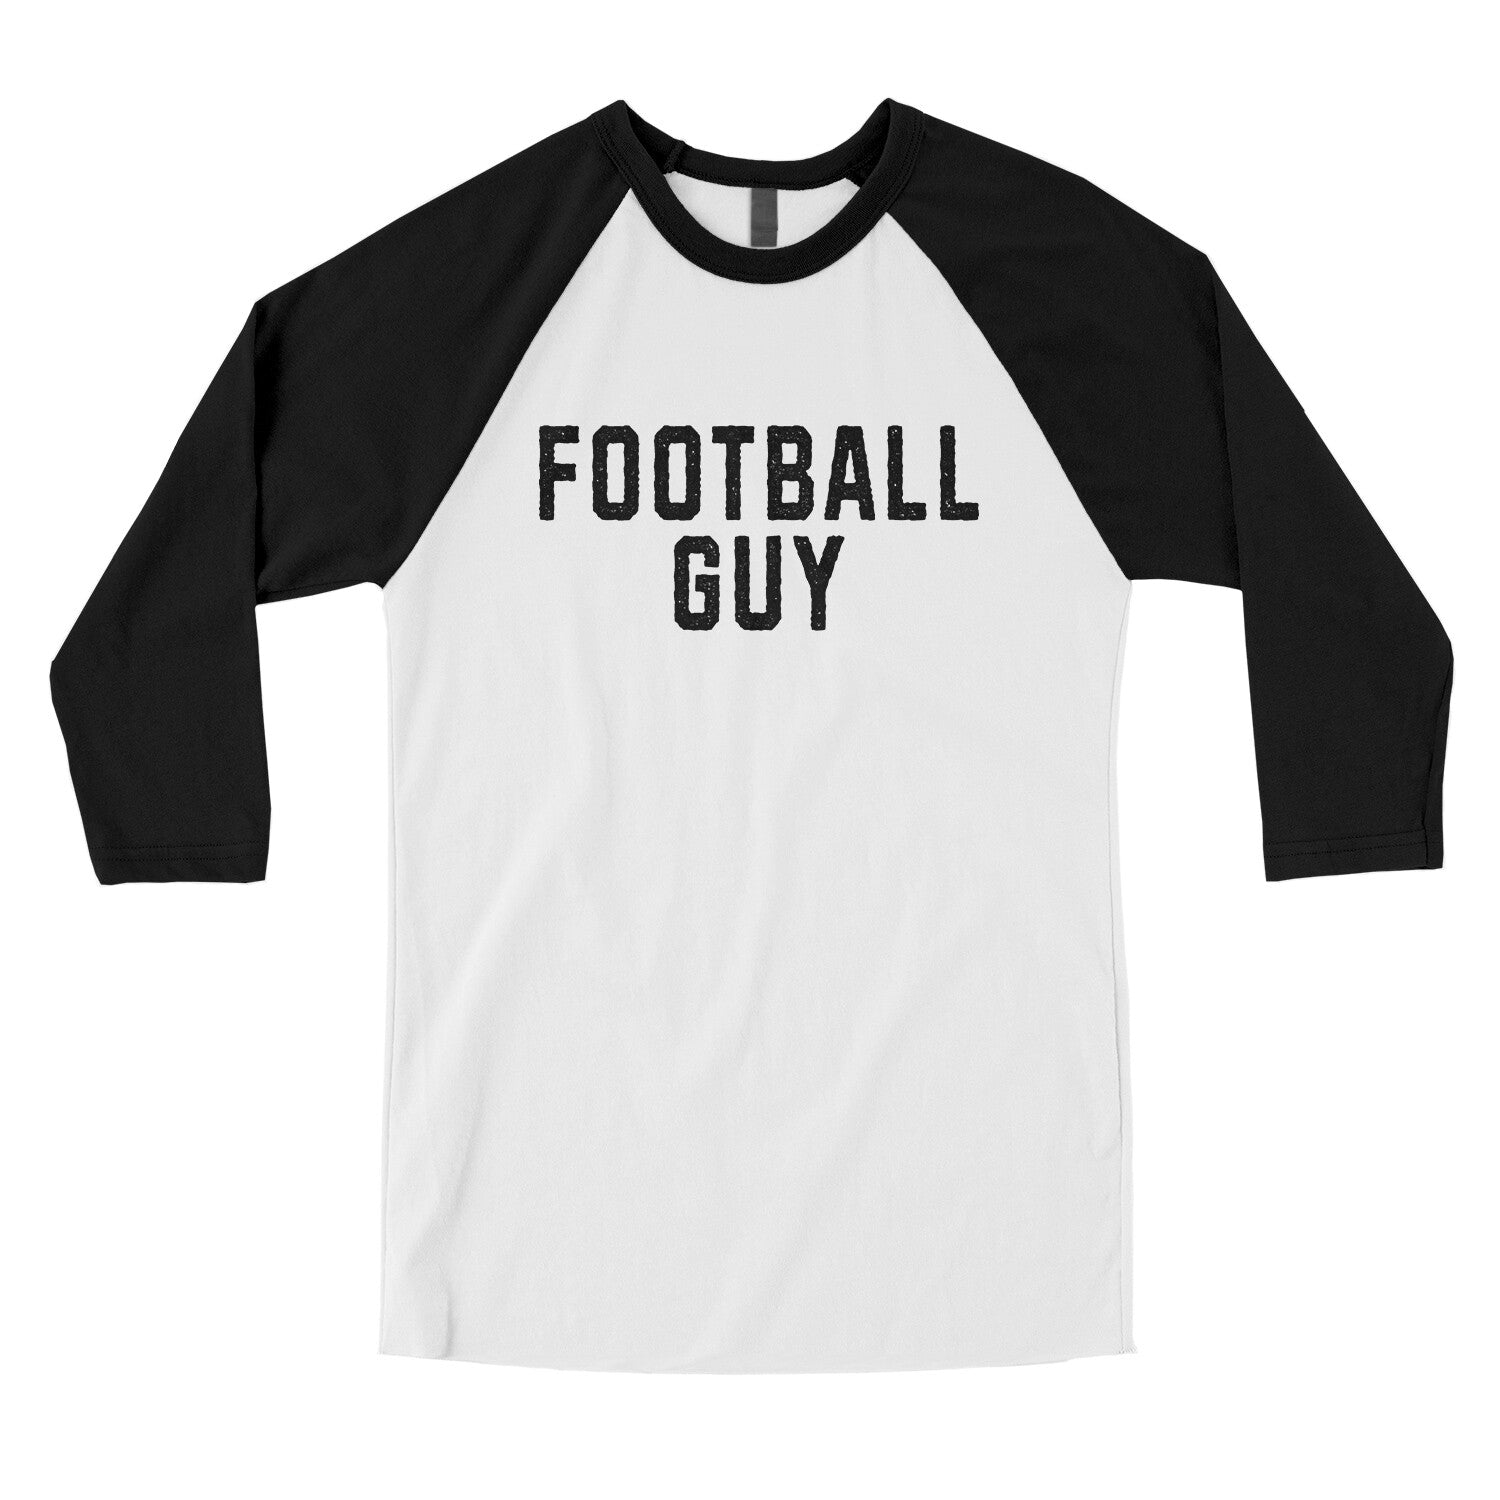 Football Guy in White with Black Color